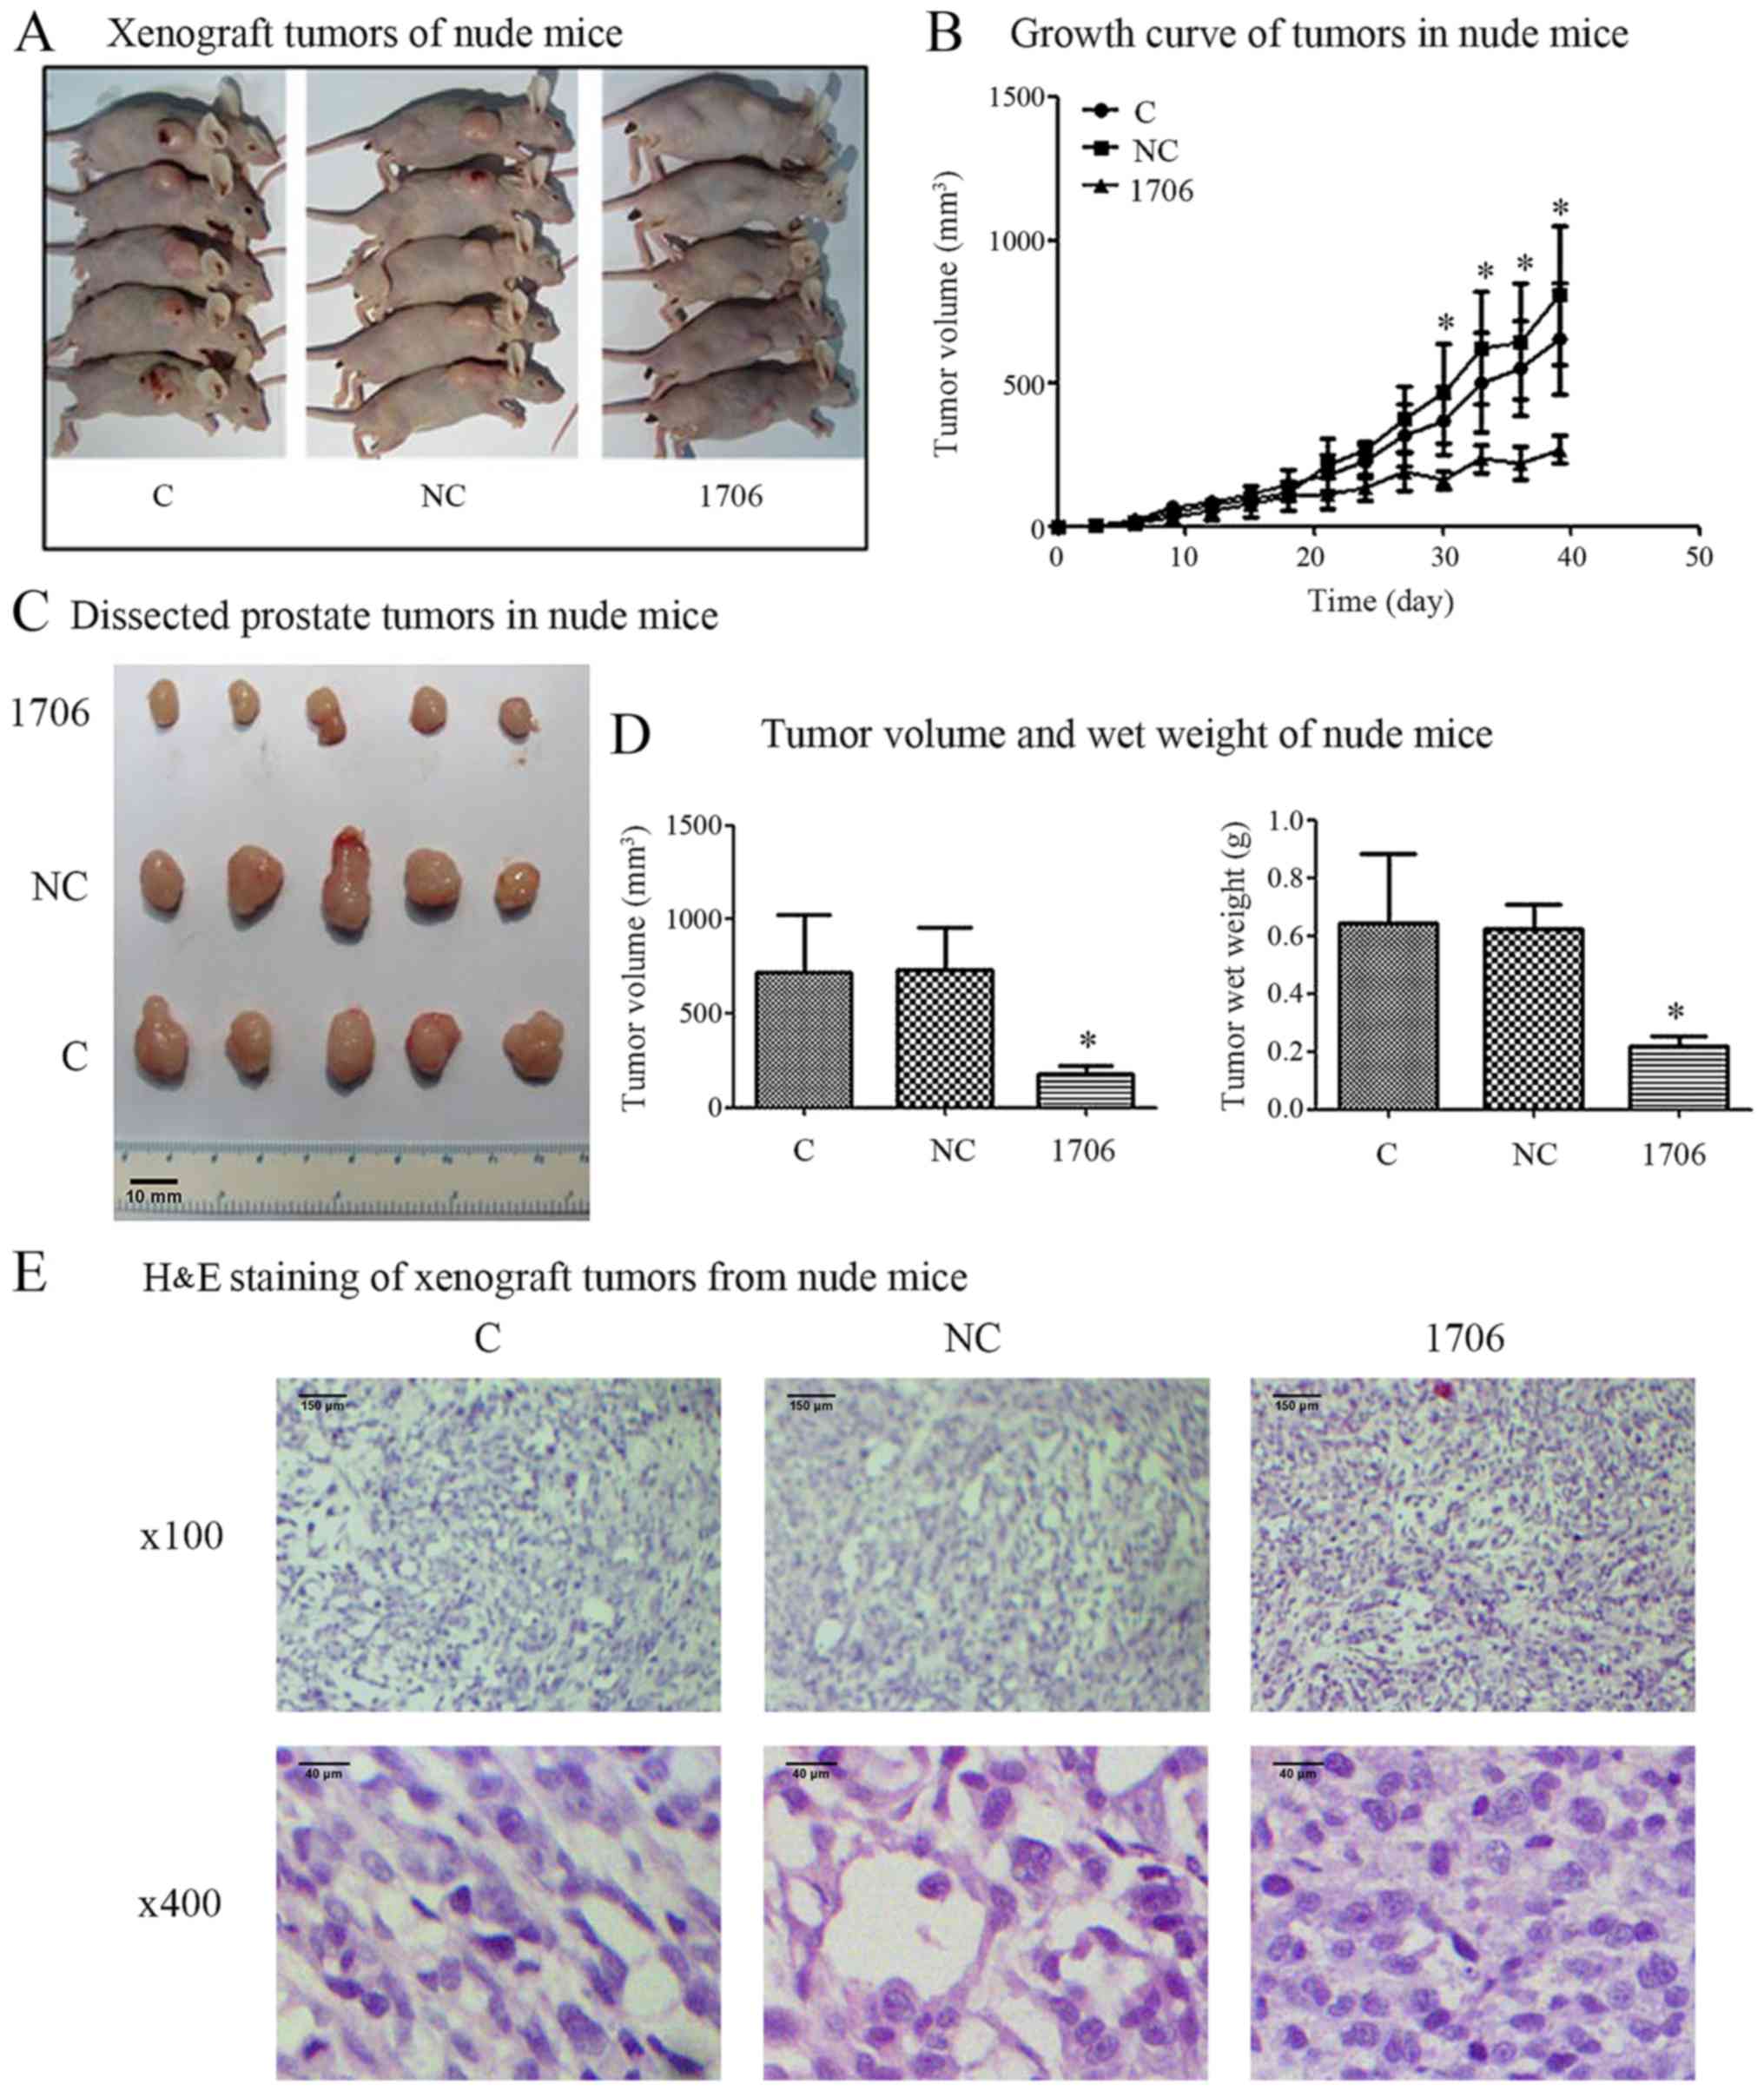 Growth of nude mouse tumors. increase in mean tumor area